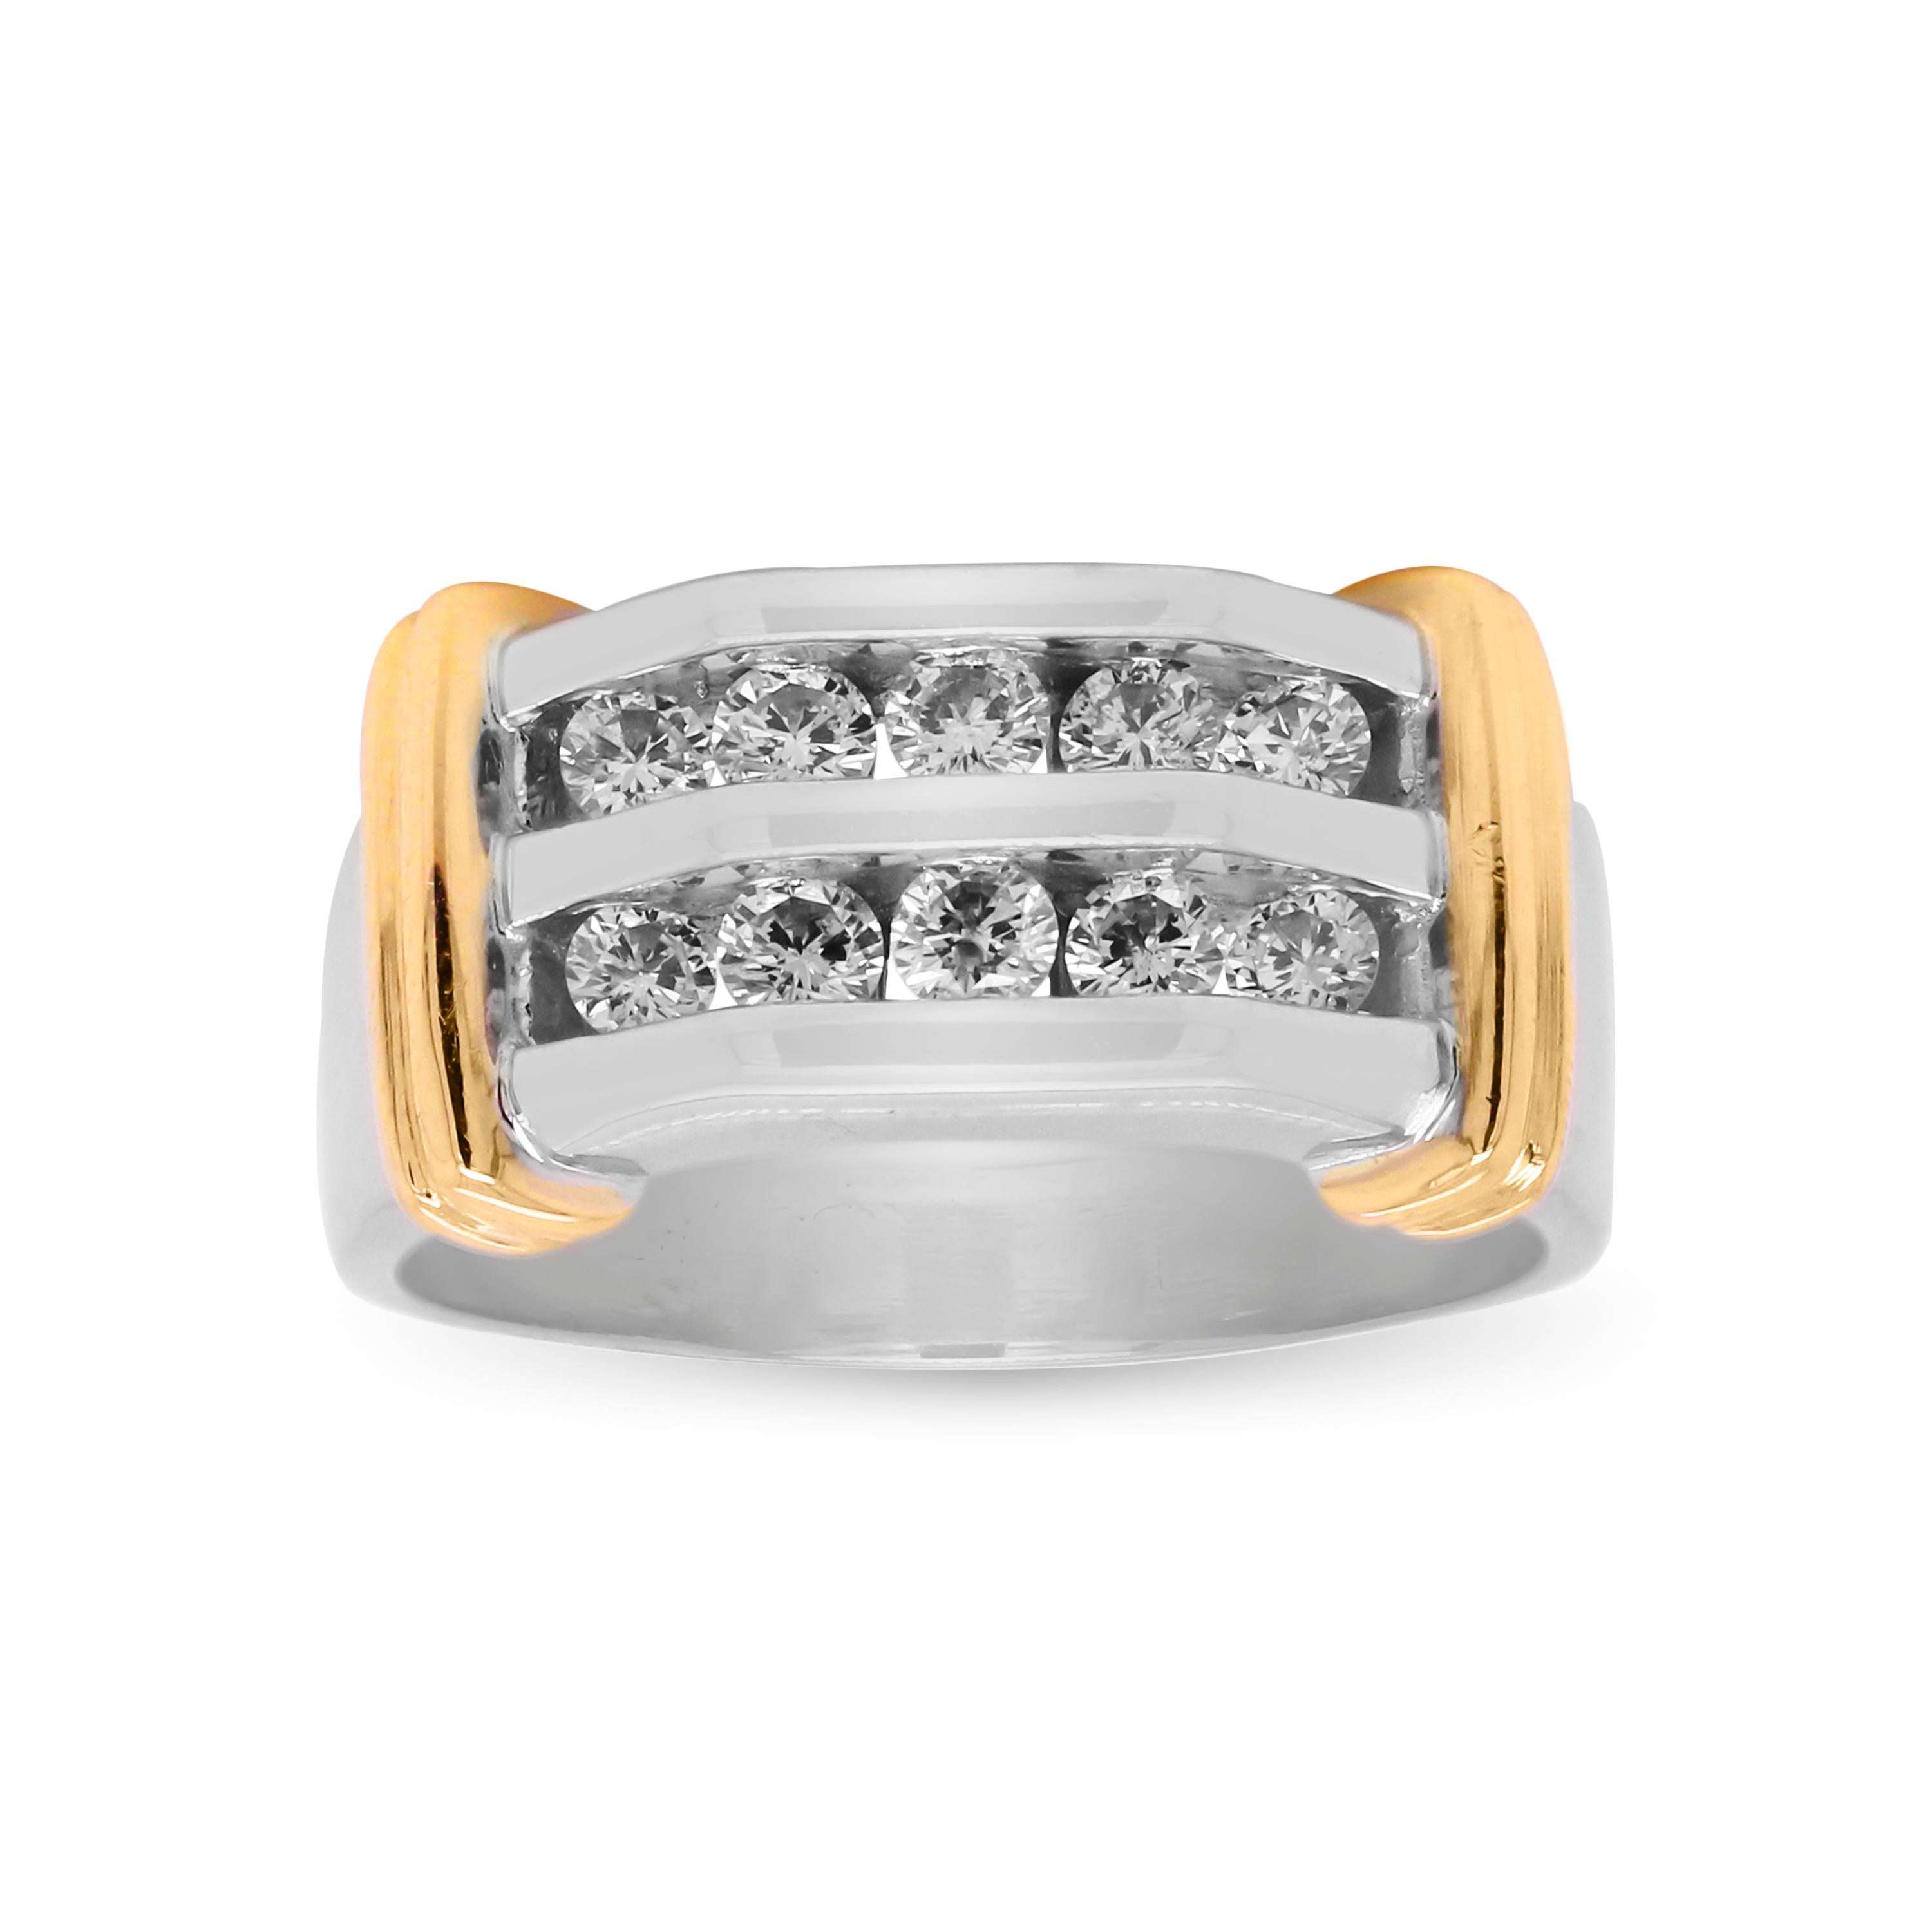 14K Yellow White Gold Channel Set Diamonds Mens Ring

Two rows of diamonds are channel set in the center. 10 diamonds total 

1 carat G color, VS clarity diamonds total weight. Each diamond is 0.10 carat

Ring is crafted in solid 14K white gold with